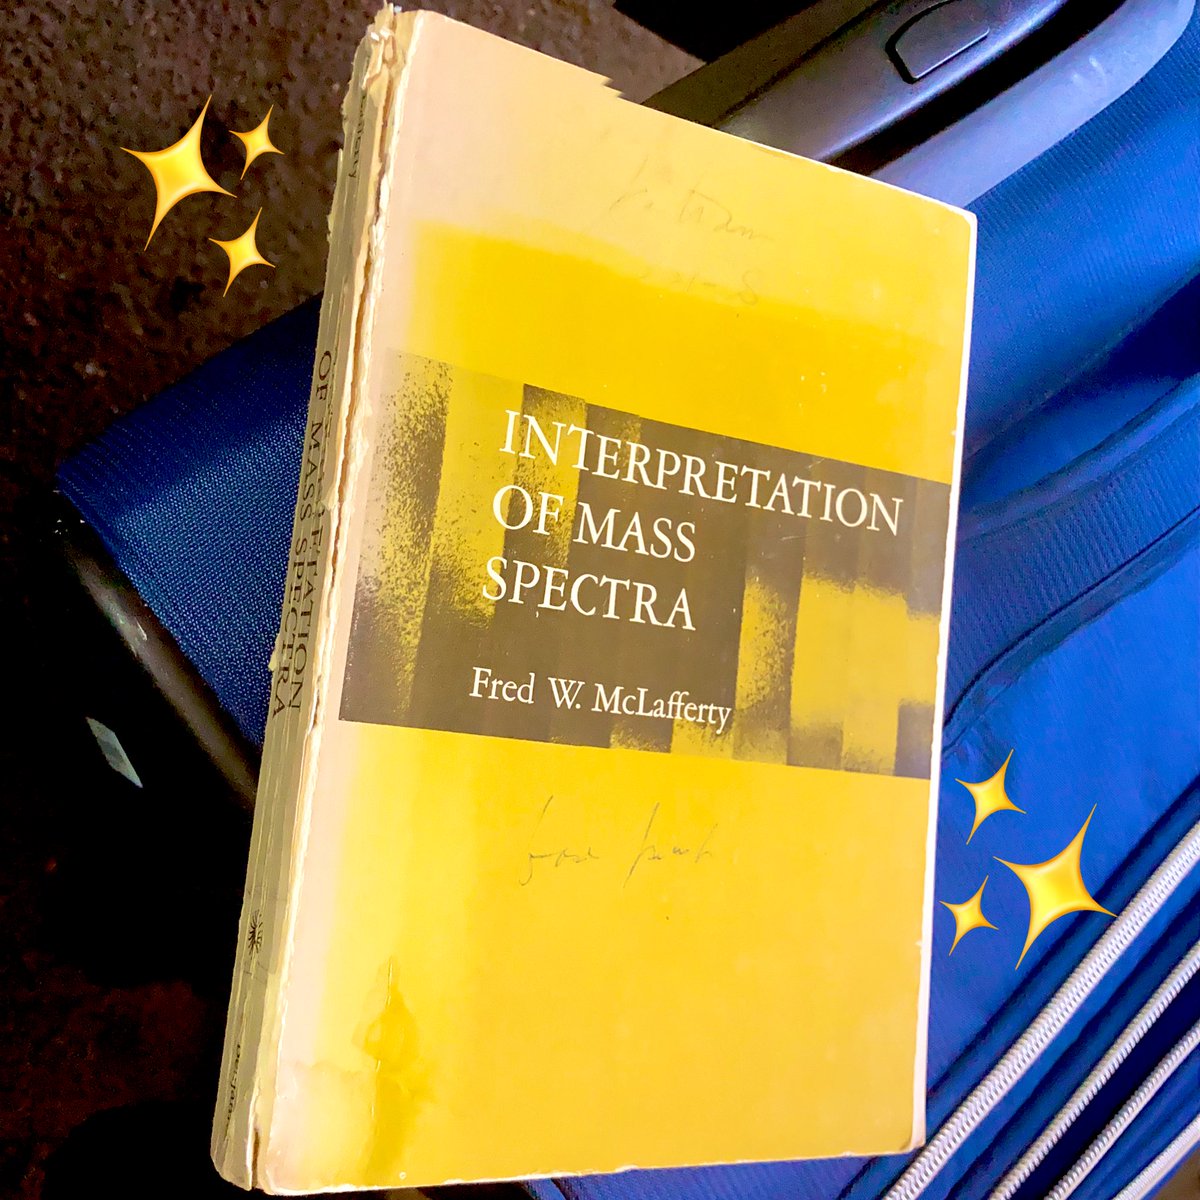 In an auspicious harbinger of #ASMS2023, on my way outta a customer site this afternoon to go to the airport I saw a copy of “Interpretation of Mass Spectra” on a free book pile (…consequently I have ANOTHER one).

(Maybe I’ll fix up the binding and leave it by history posters!)